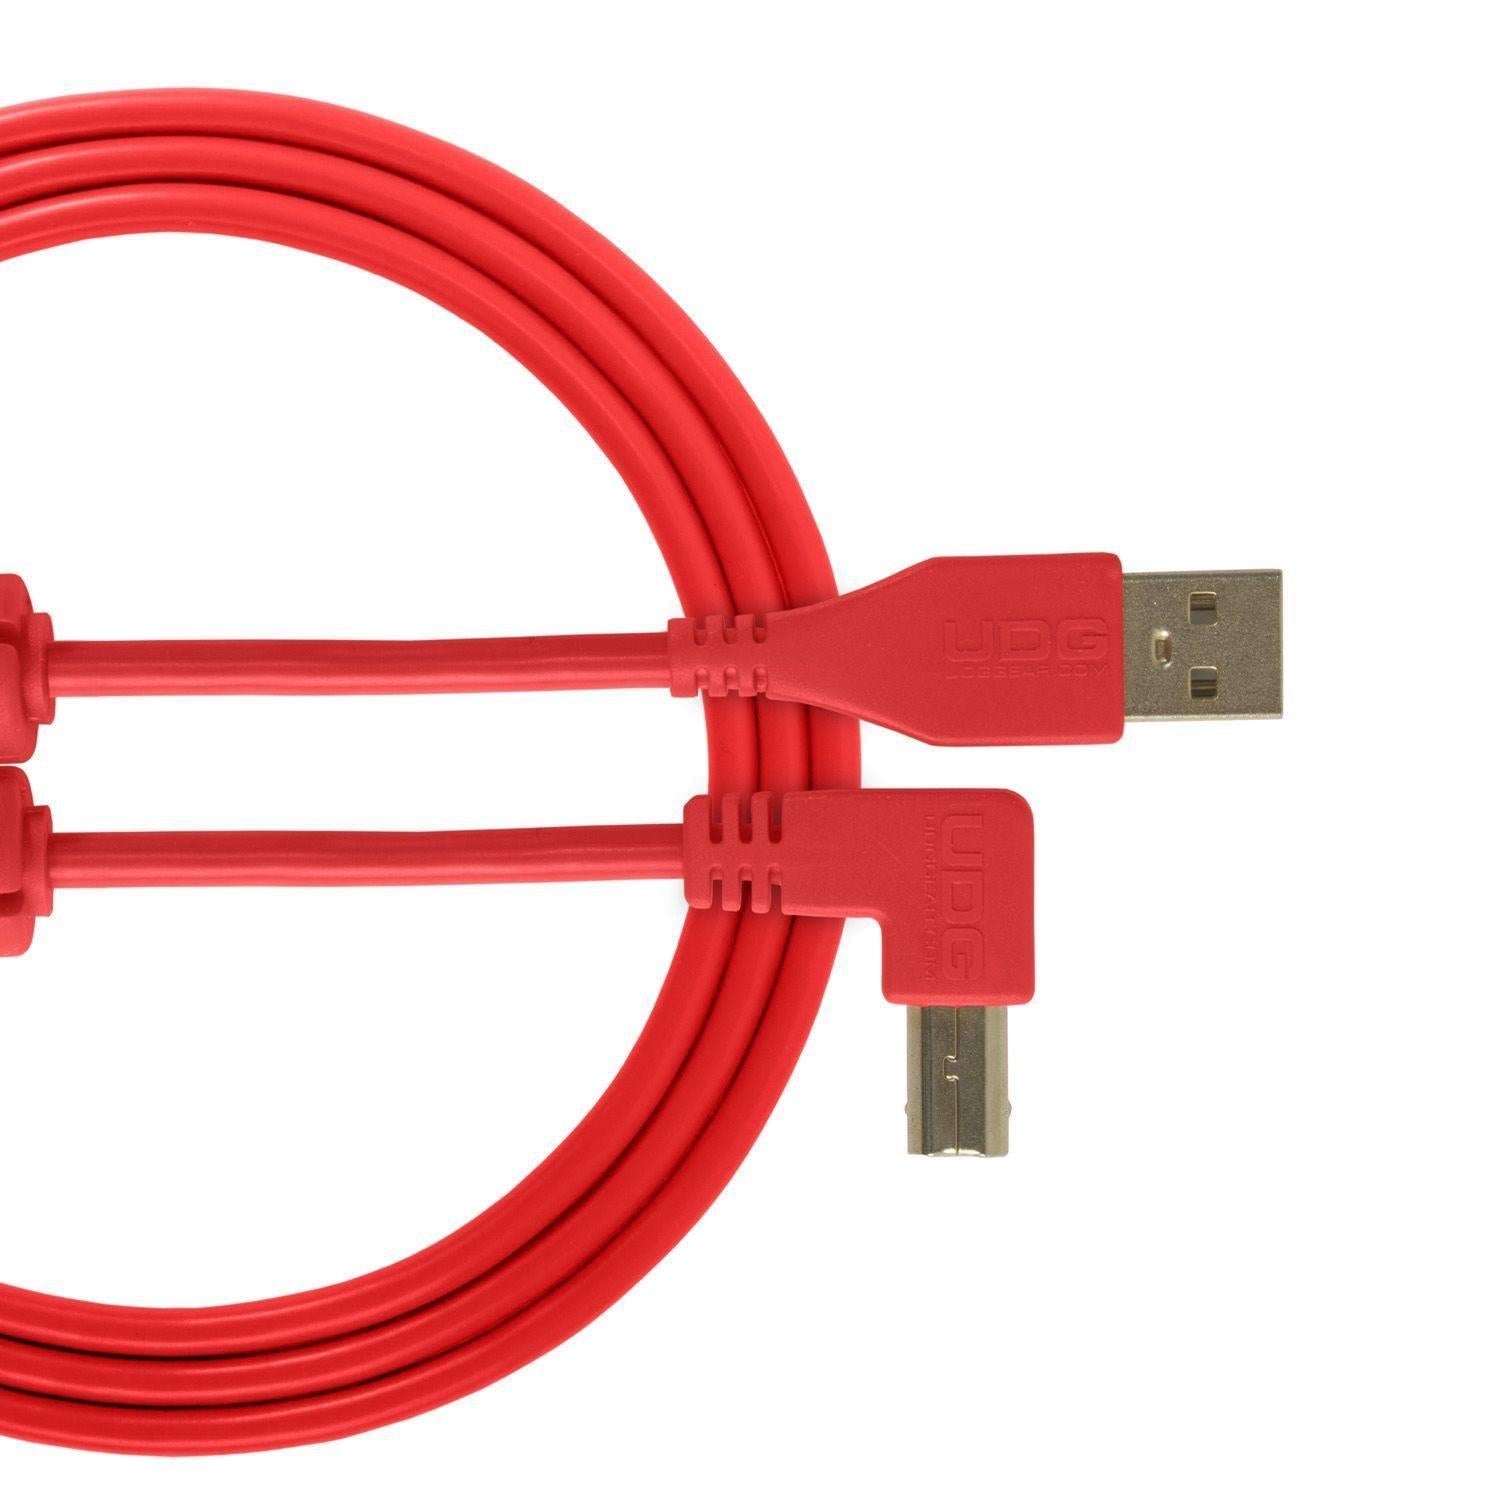 UDG Ultimate Audio Cable USB 2.0 A-B Red Angled 3m - DY Pro Audio